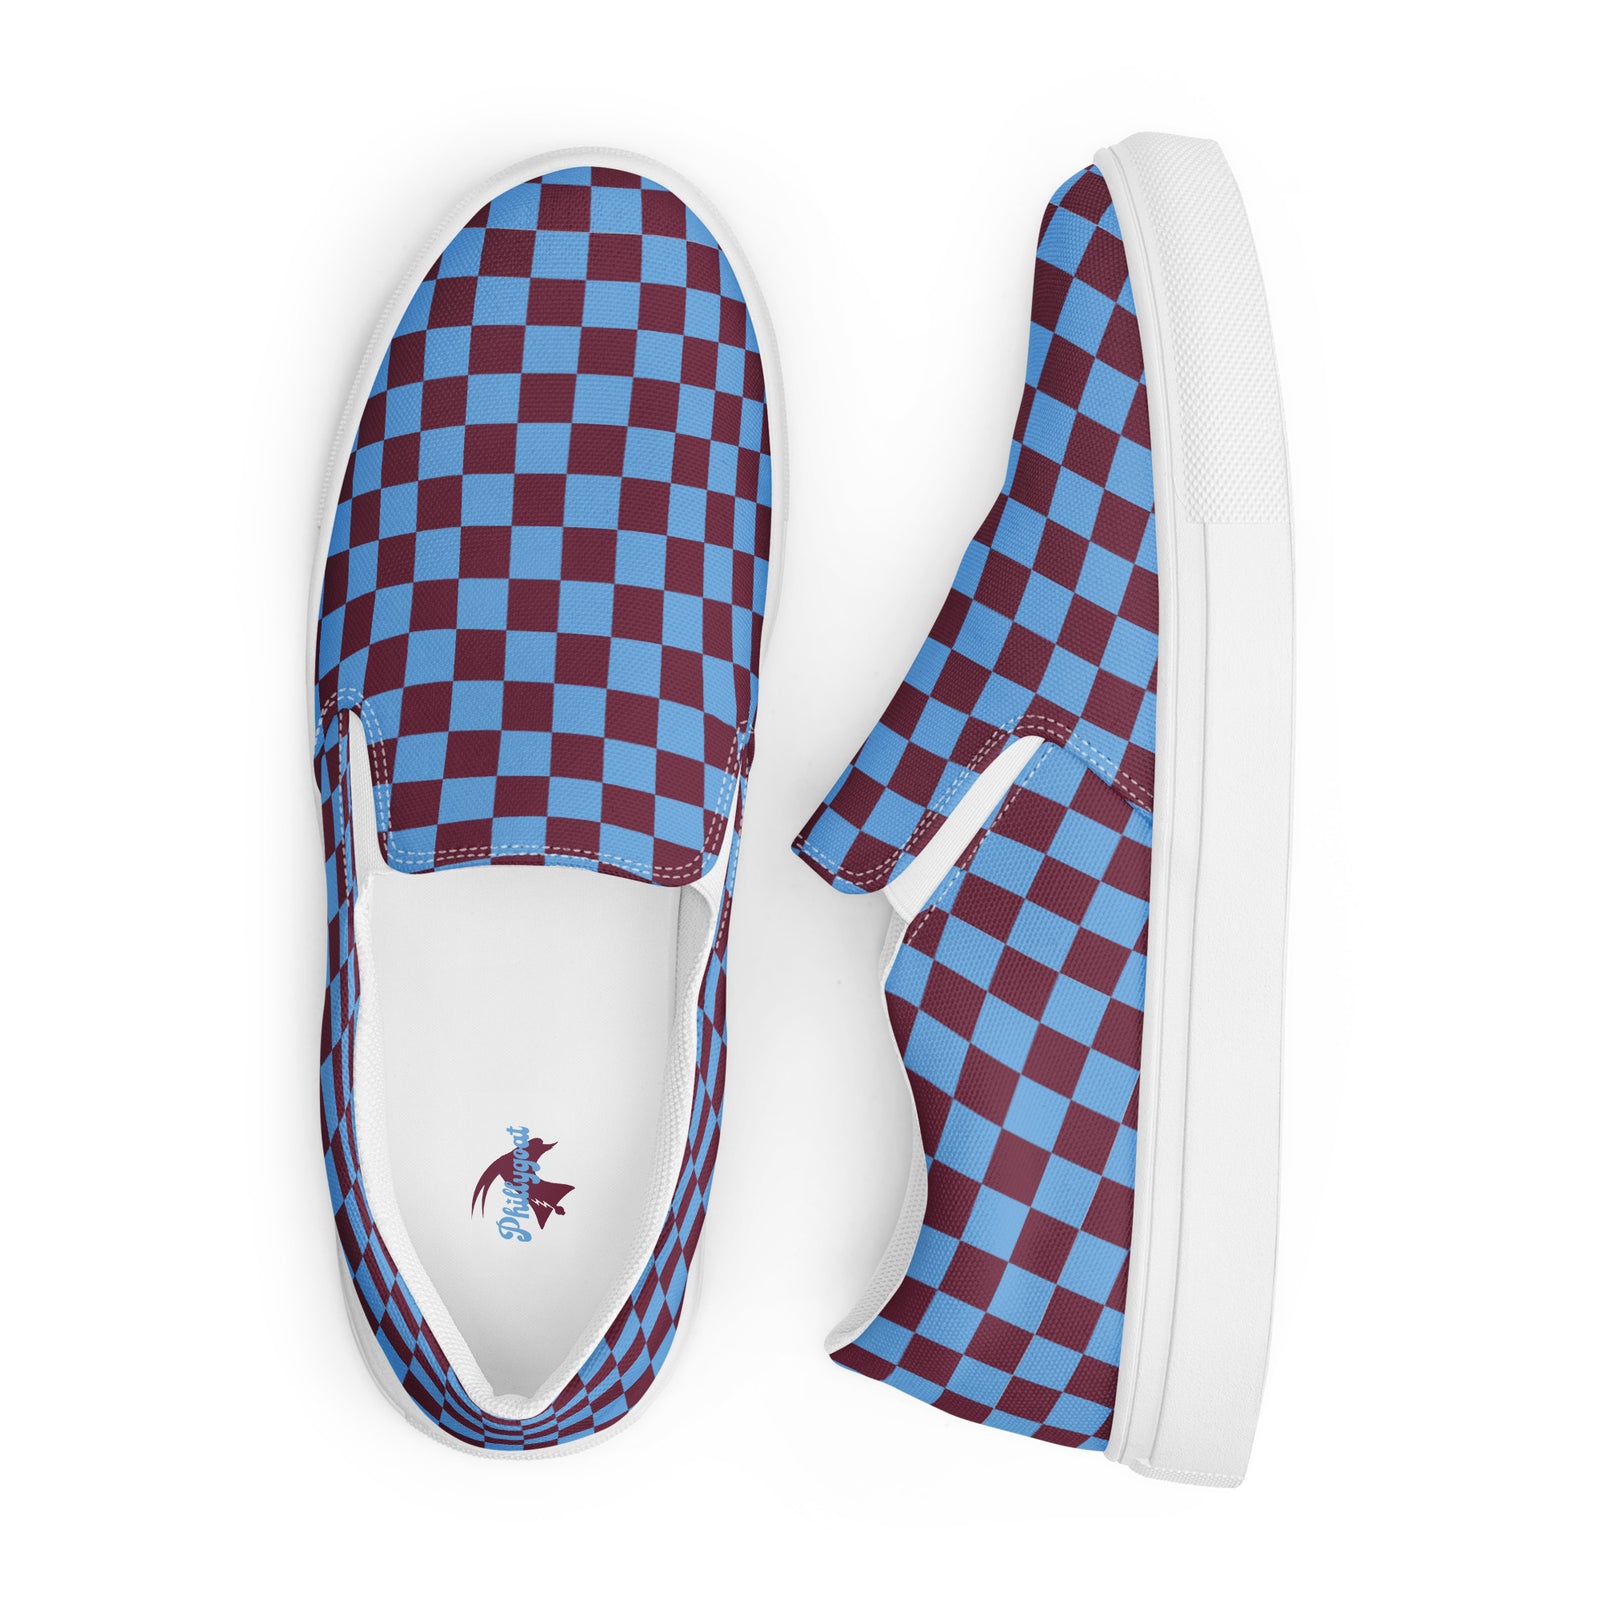 "The Schmitty's" Women’s Slip-on Canvas Shoes